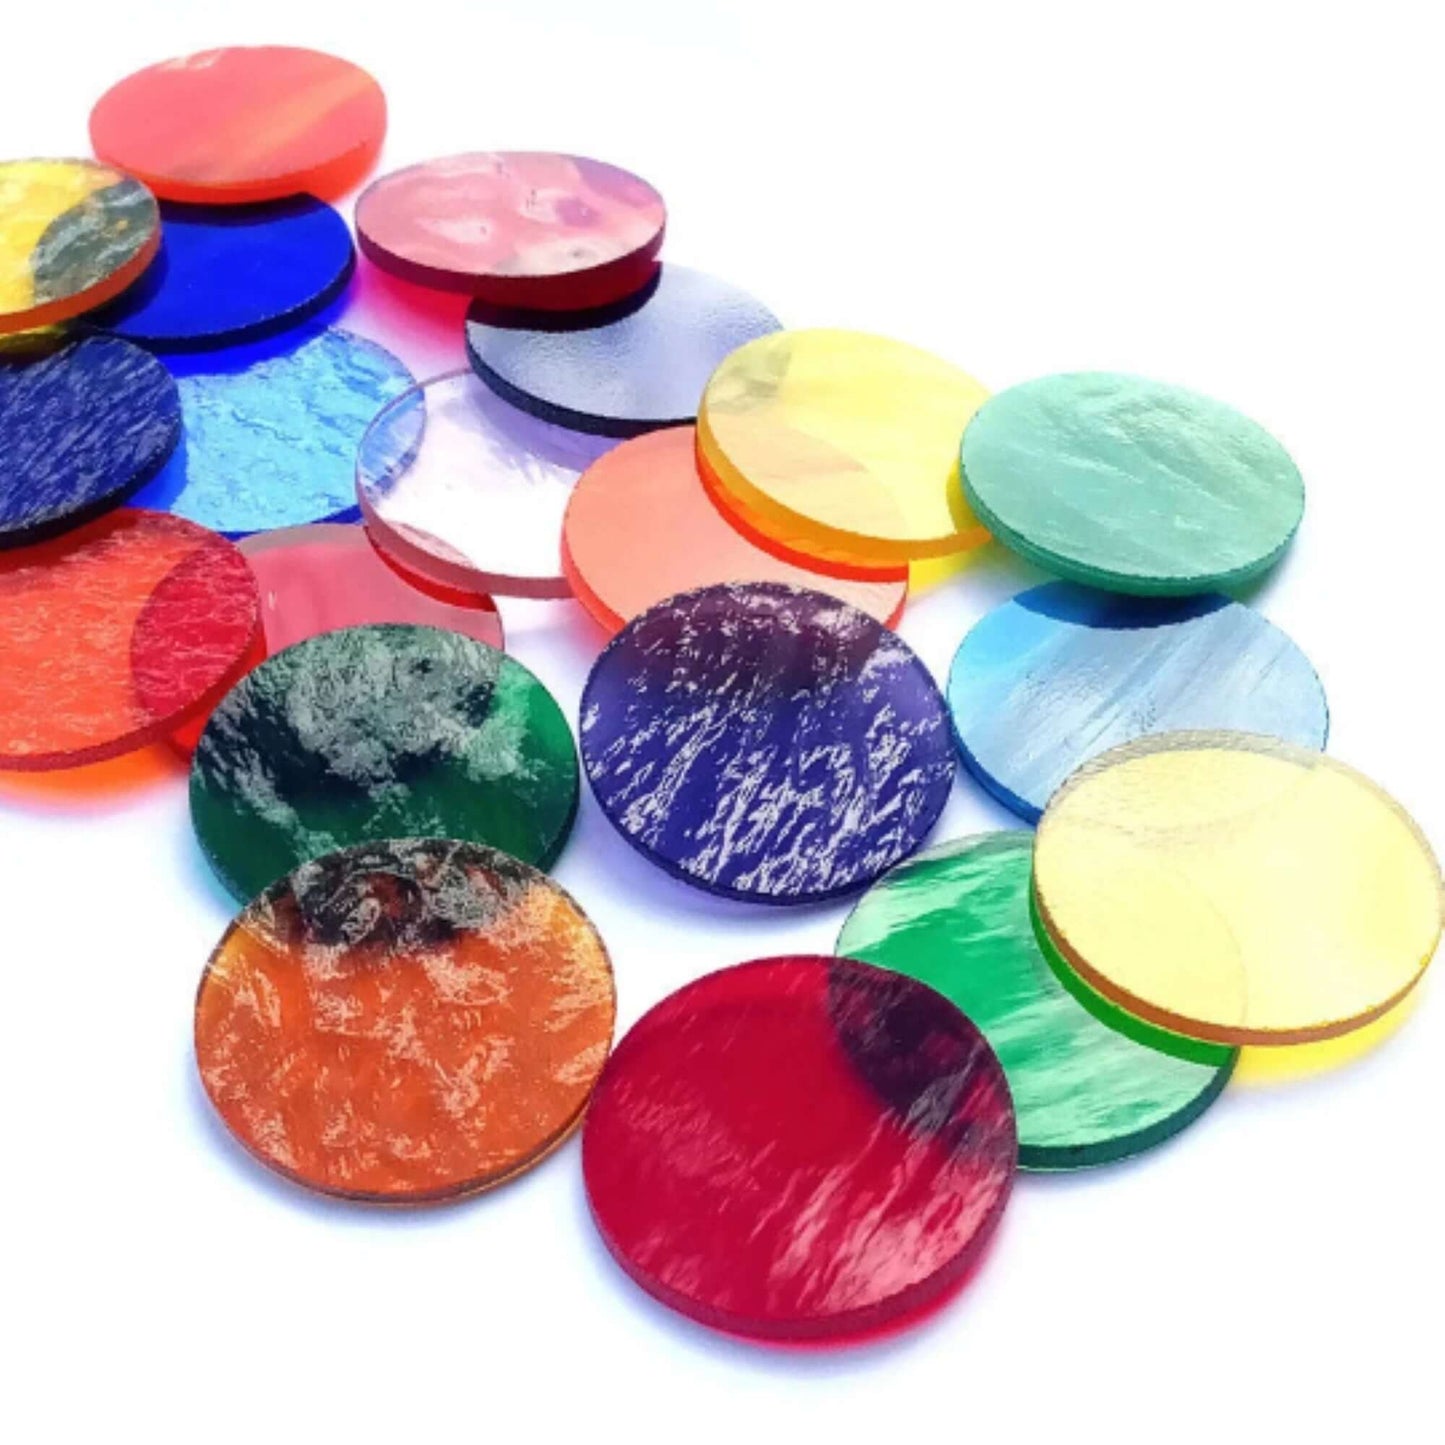 Precut Stained Glass Circles, 1.5" Diameter Glass Circles in Assorted Colors